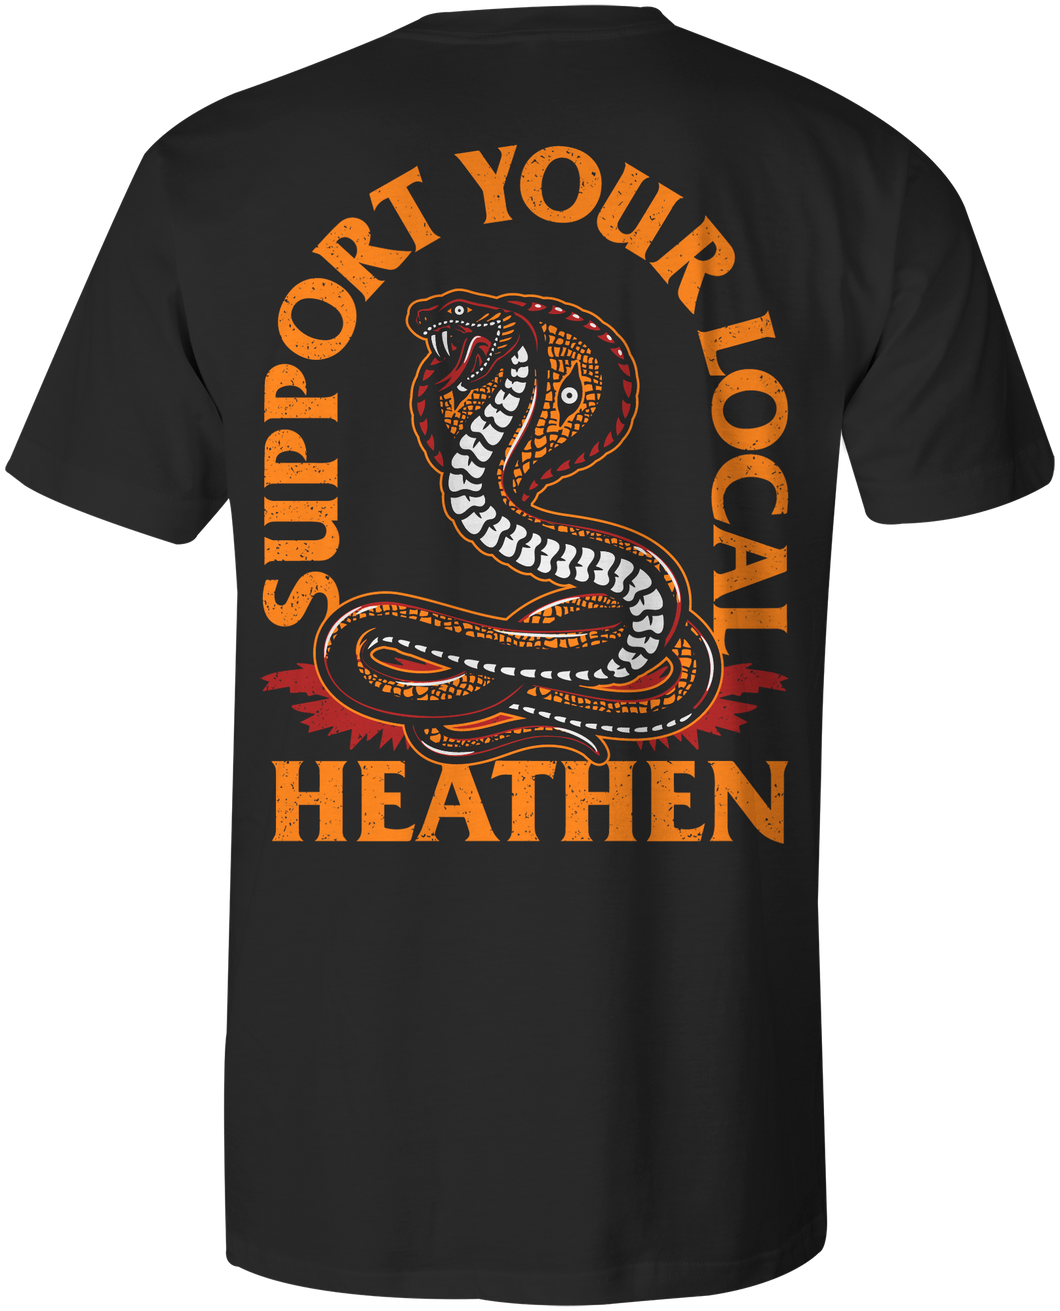 Support Your Local Heathen